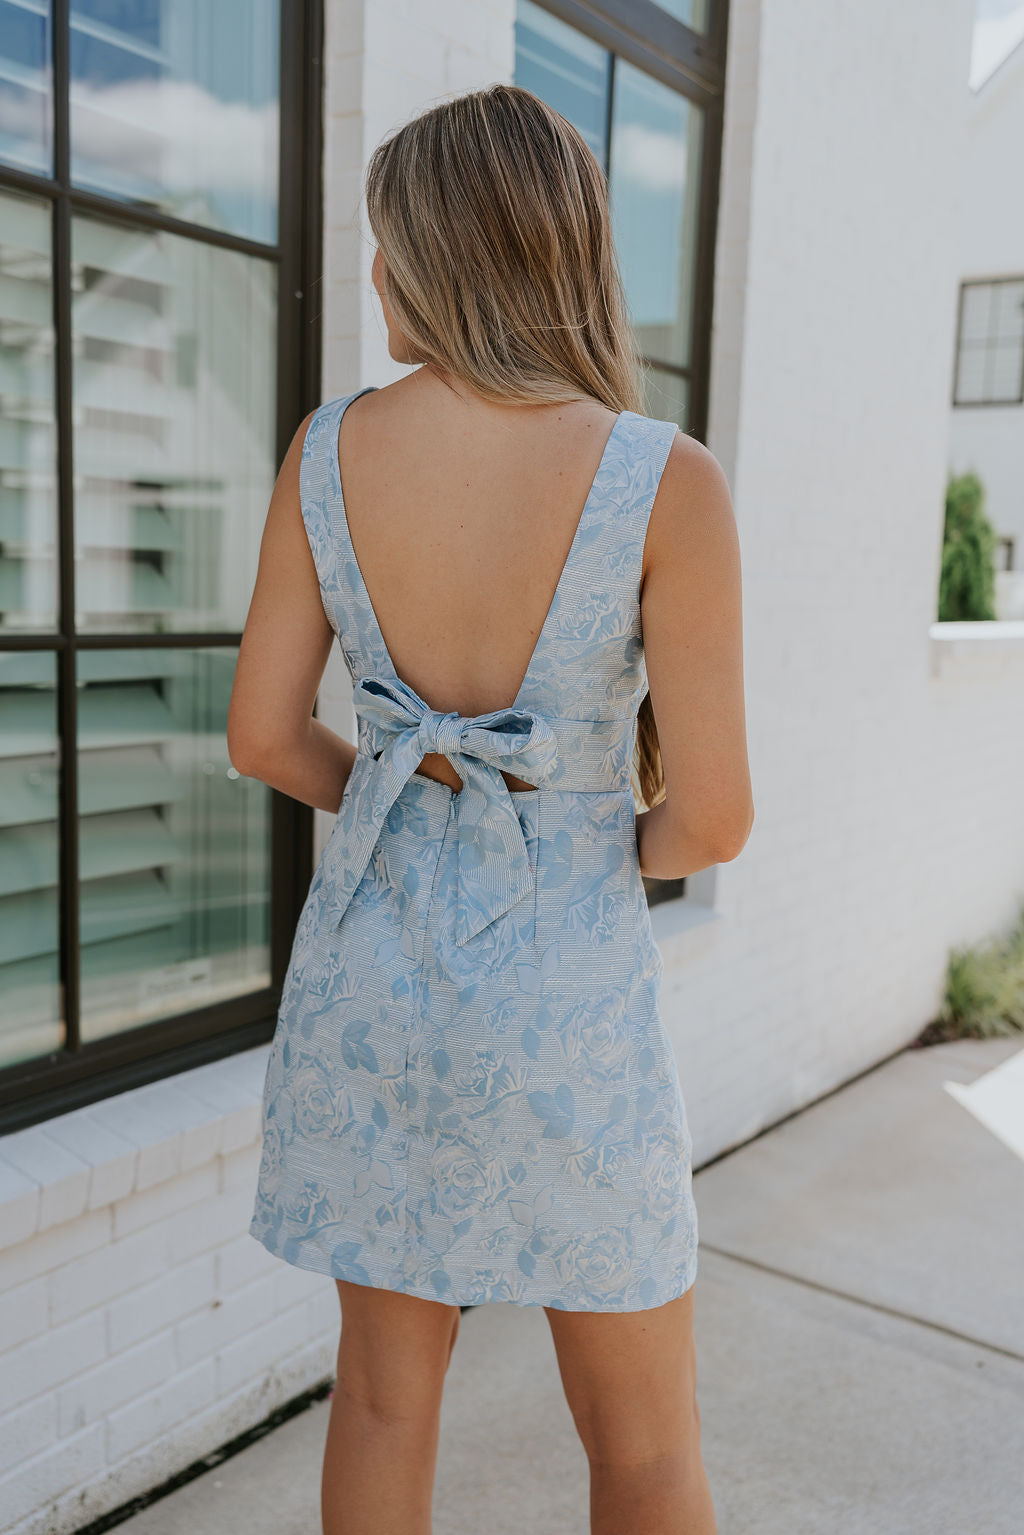 back view of female model wearing the Amalia Light Blue Rose Bow Mini Dress which features Blue and White Rose Floral Print, Blue Lining, Mini Length, Plunge Neckline, Sleeveless, Back Bow Detail, Back Cutout and Monochrome Back Zipper with Hook Closure